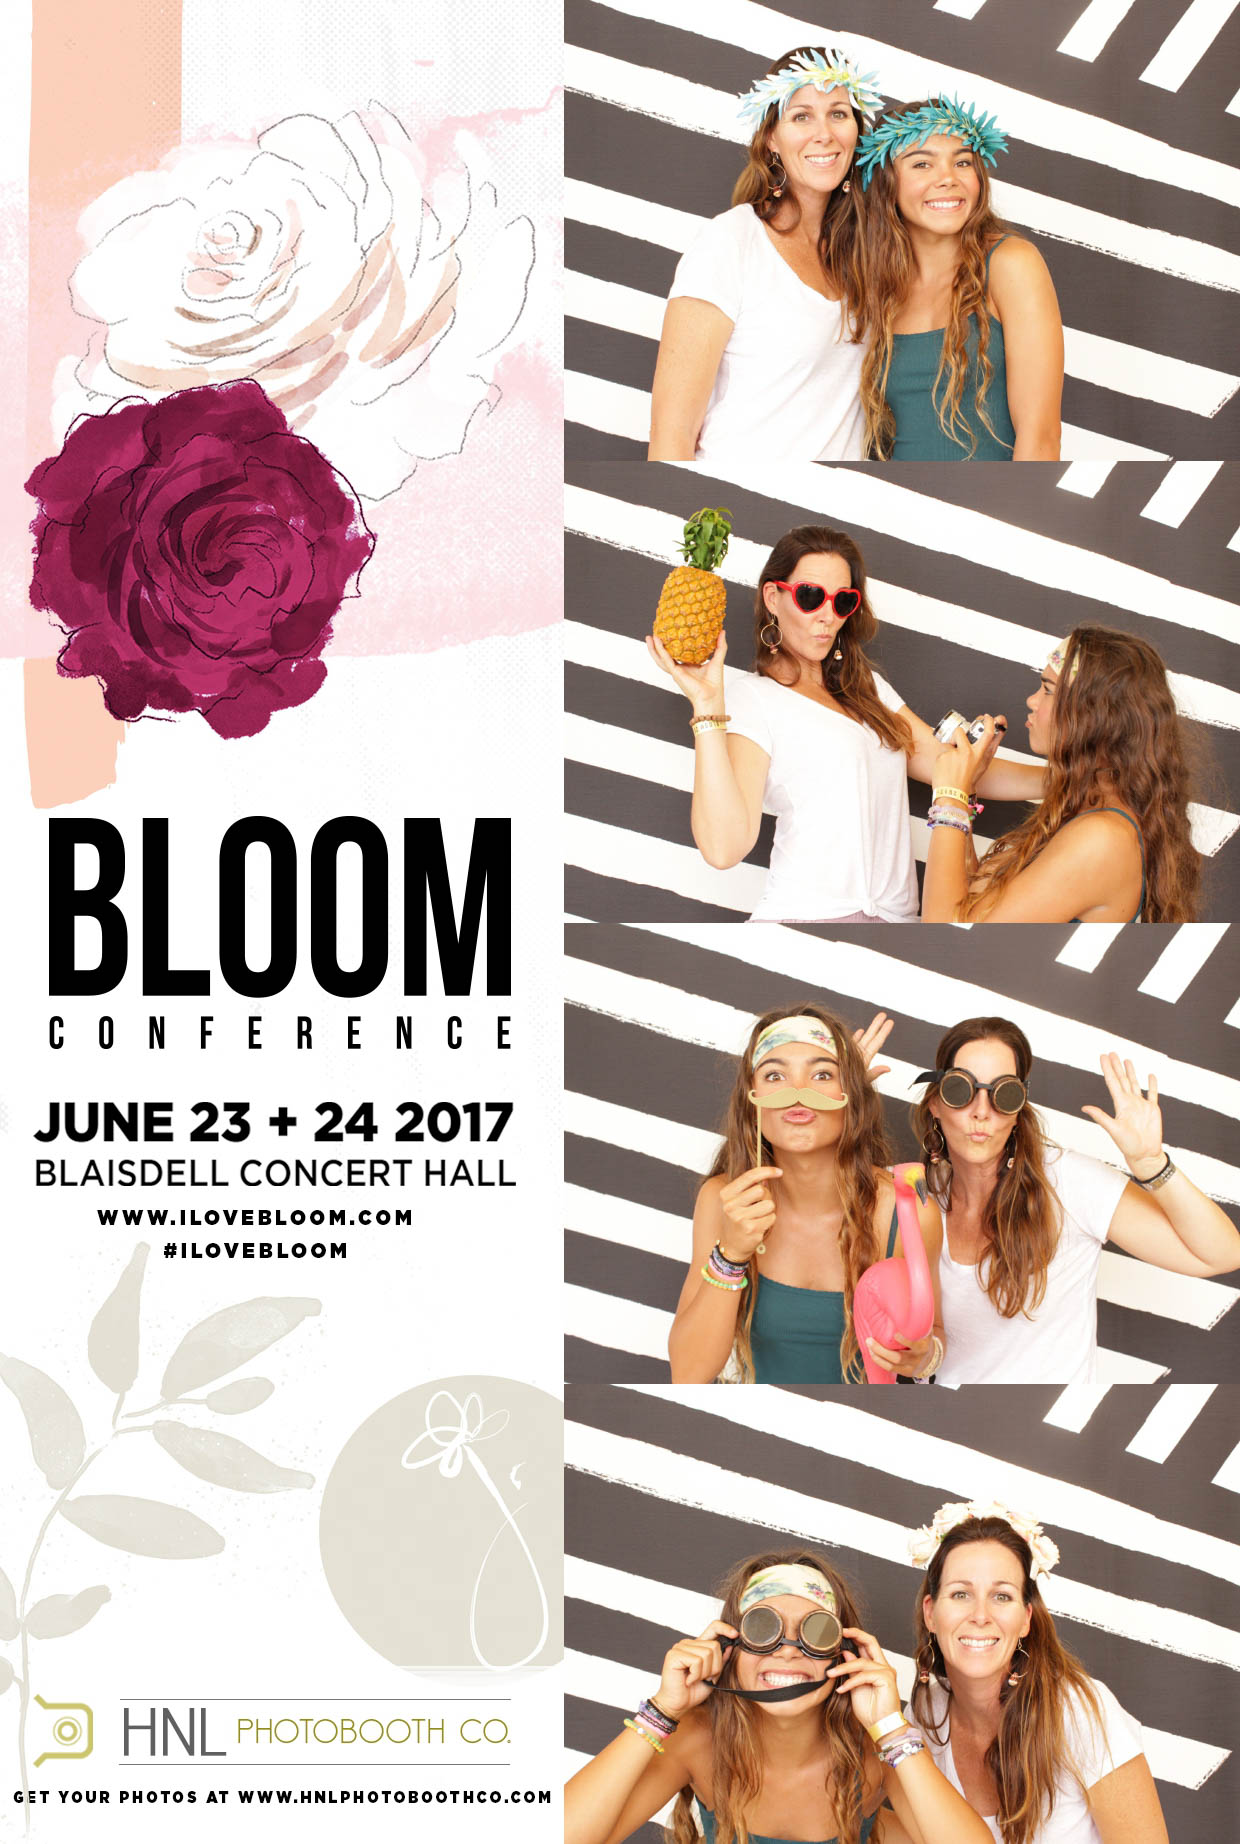 Bloom Conference Blaisdell Concert Hall Oahu Hawaii Photo Booth NEW-7.jpg